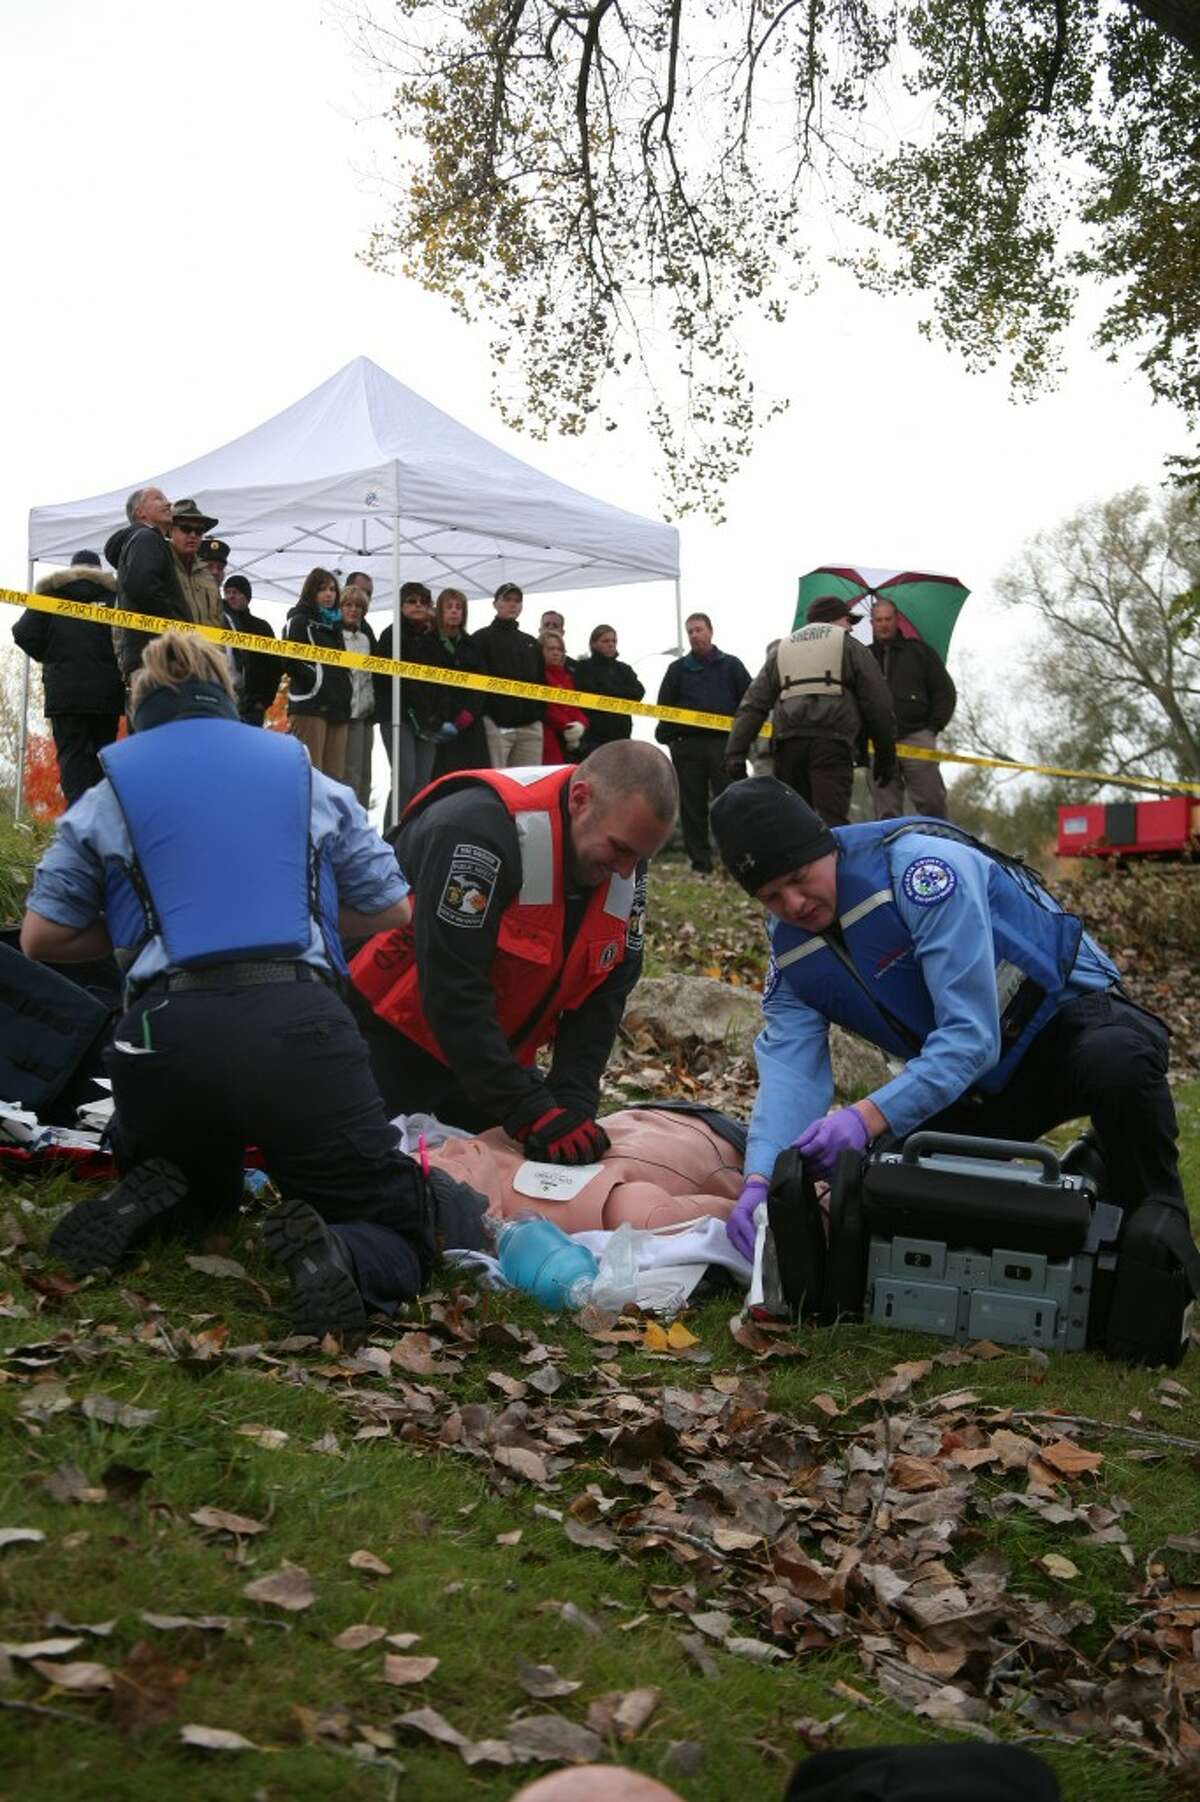 RESCUE DEMONSTRATION: First responders perform CPR on a “dummy” during a simulated Muskegon River rescue demonstration on Thursday at Hemlock Park. Students from the 2012-13 Leadership Mecosta class watch from the shore during its public safety day. (Pioneer photos/Jonathan Eppley)